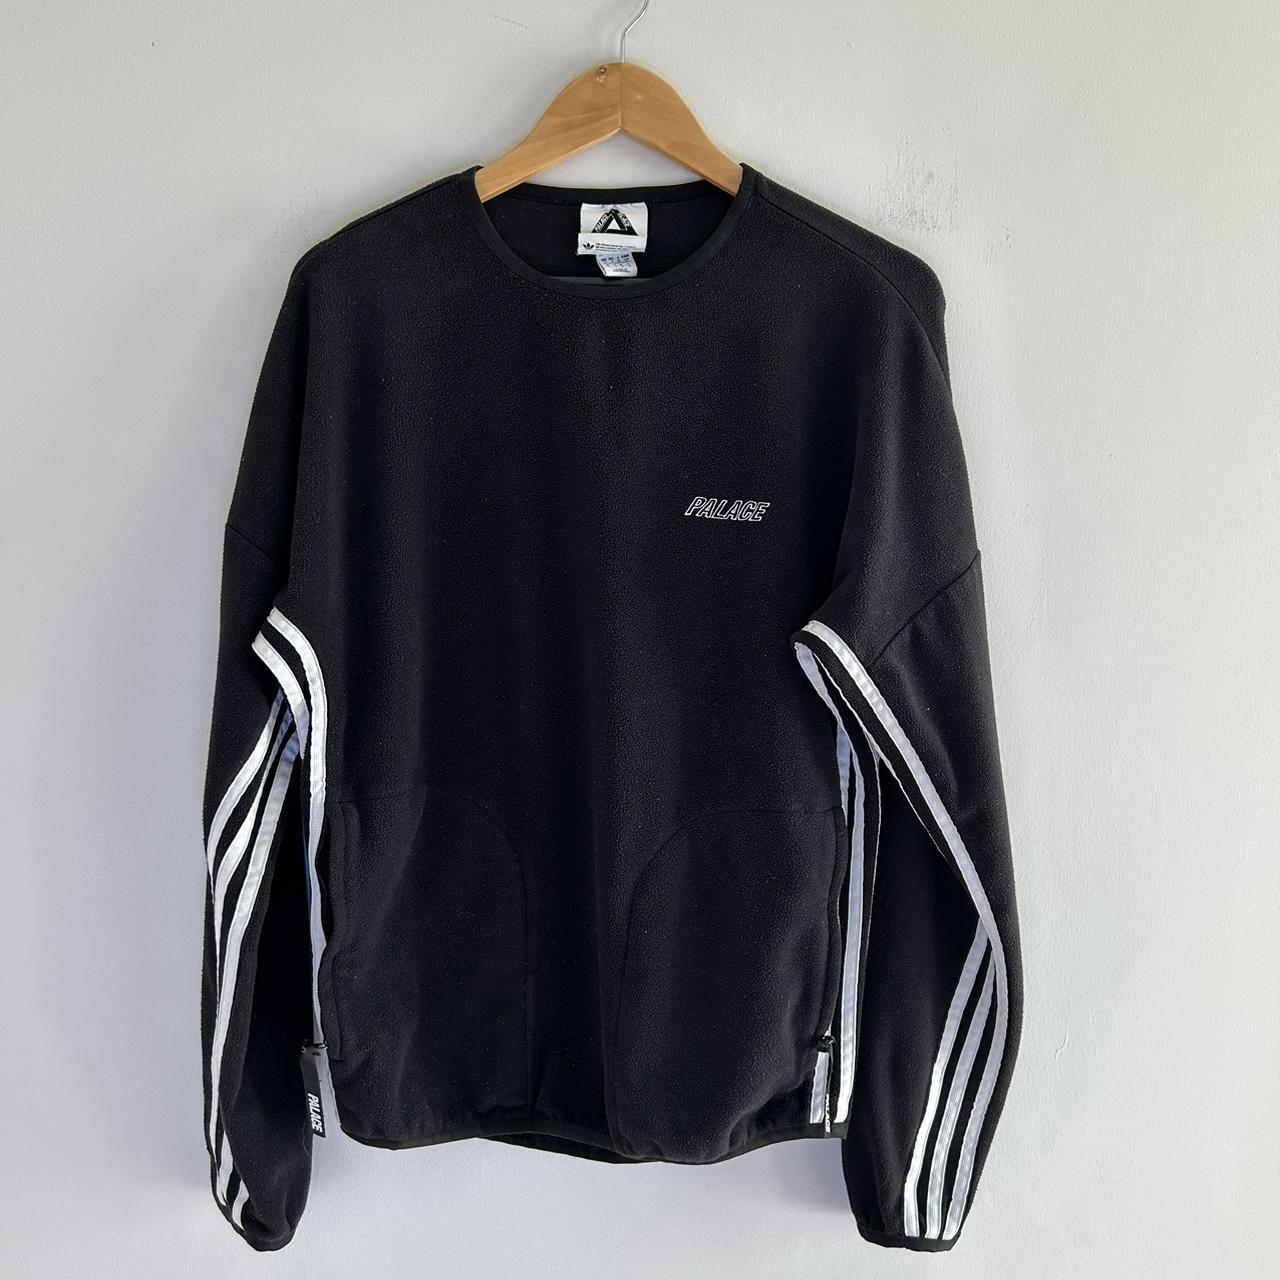 Palace x Adidas • Size S • Condition 7/10 some... - Depop